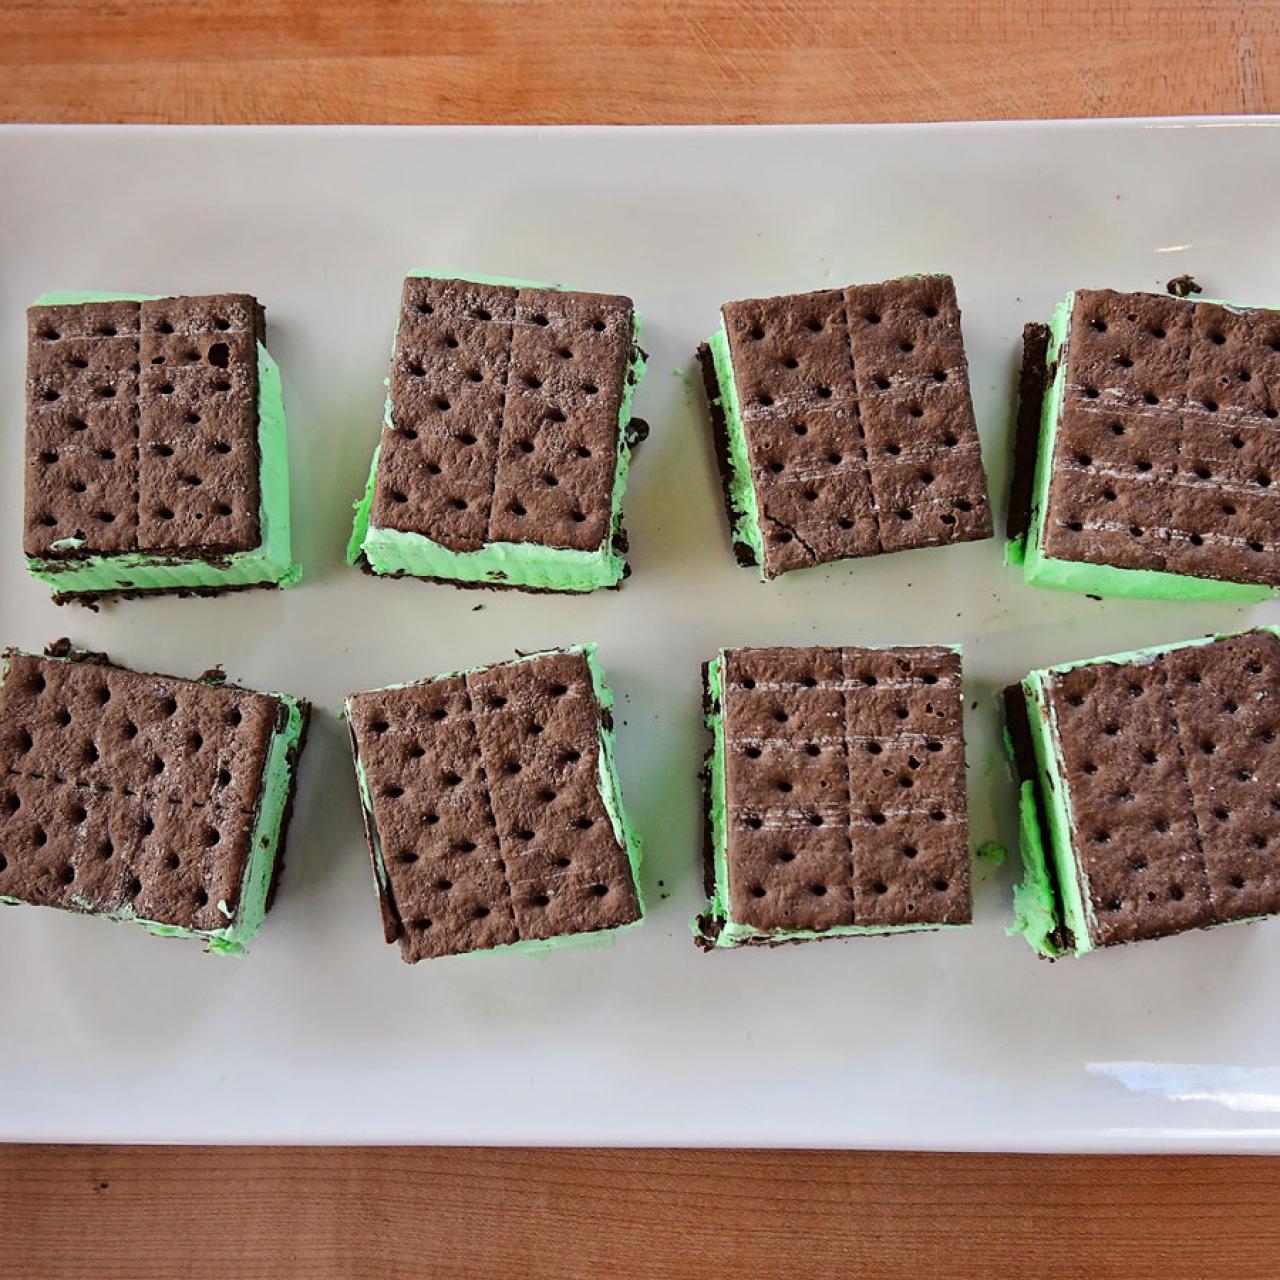 How to make fake ice cream sandwiches to be used for display.